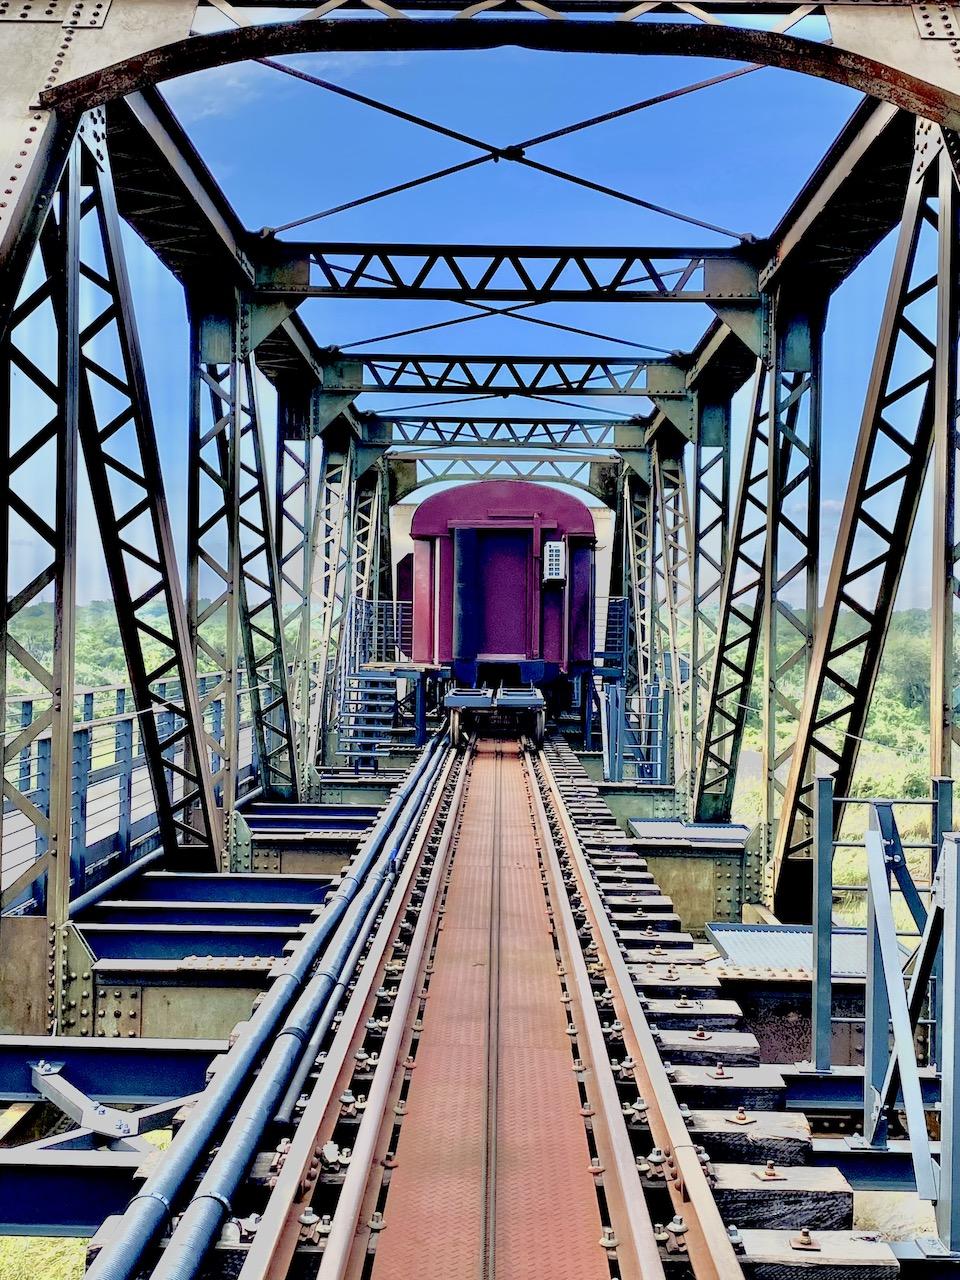  Live the High Life With Kruger Shalati The Train On The Bridge